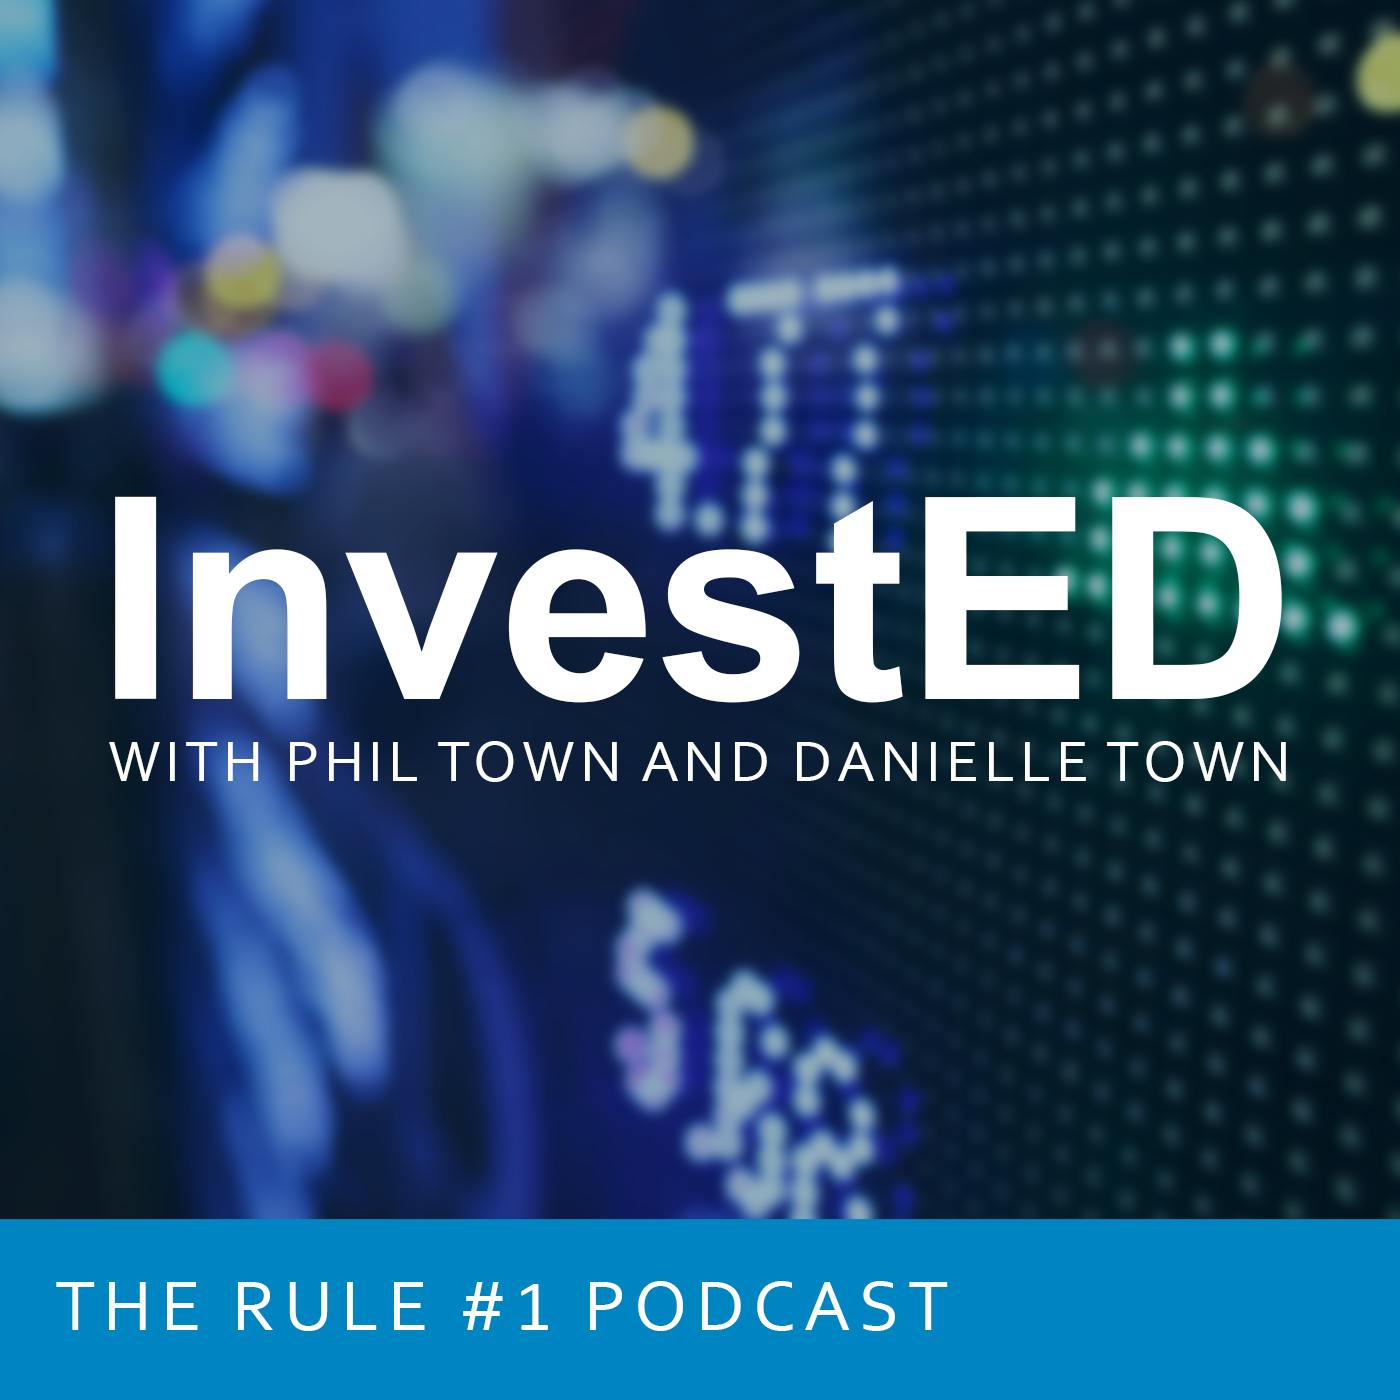 04- Using Moat and Return On Equity